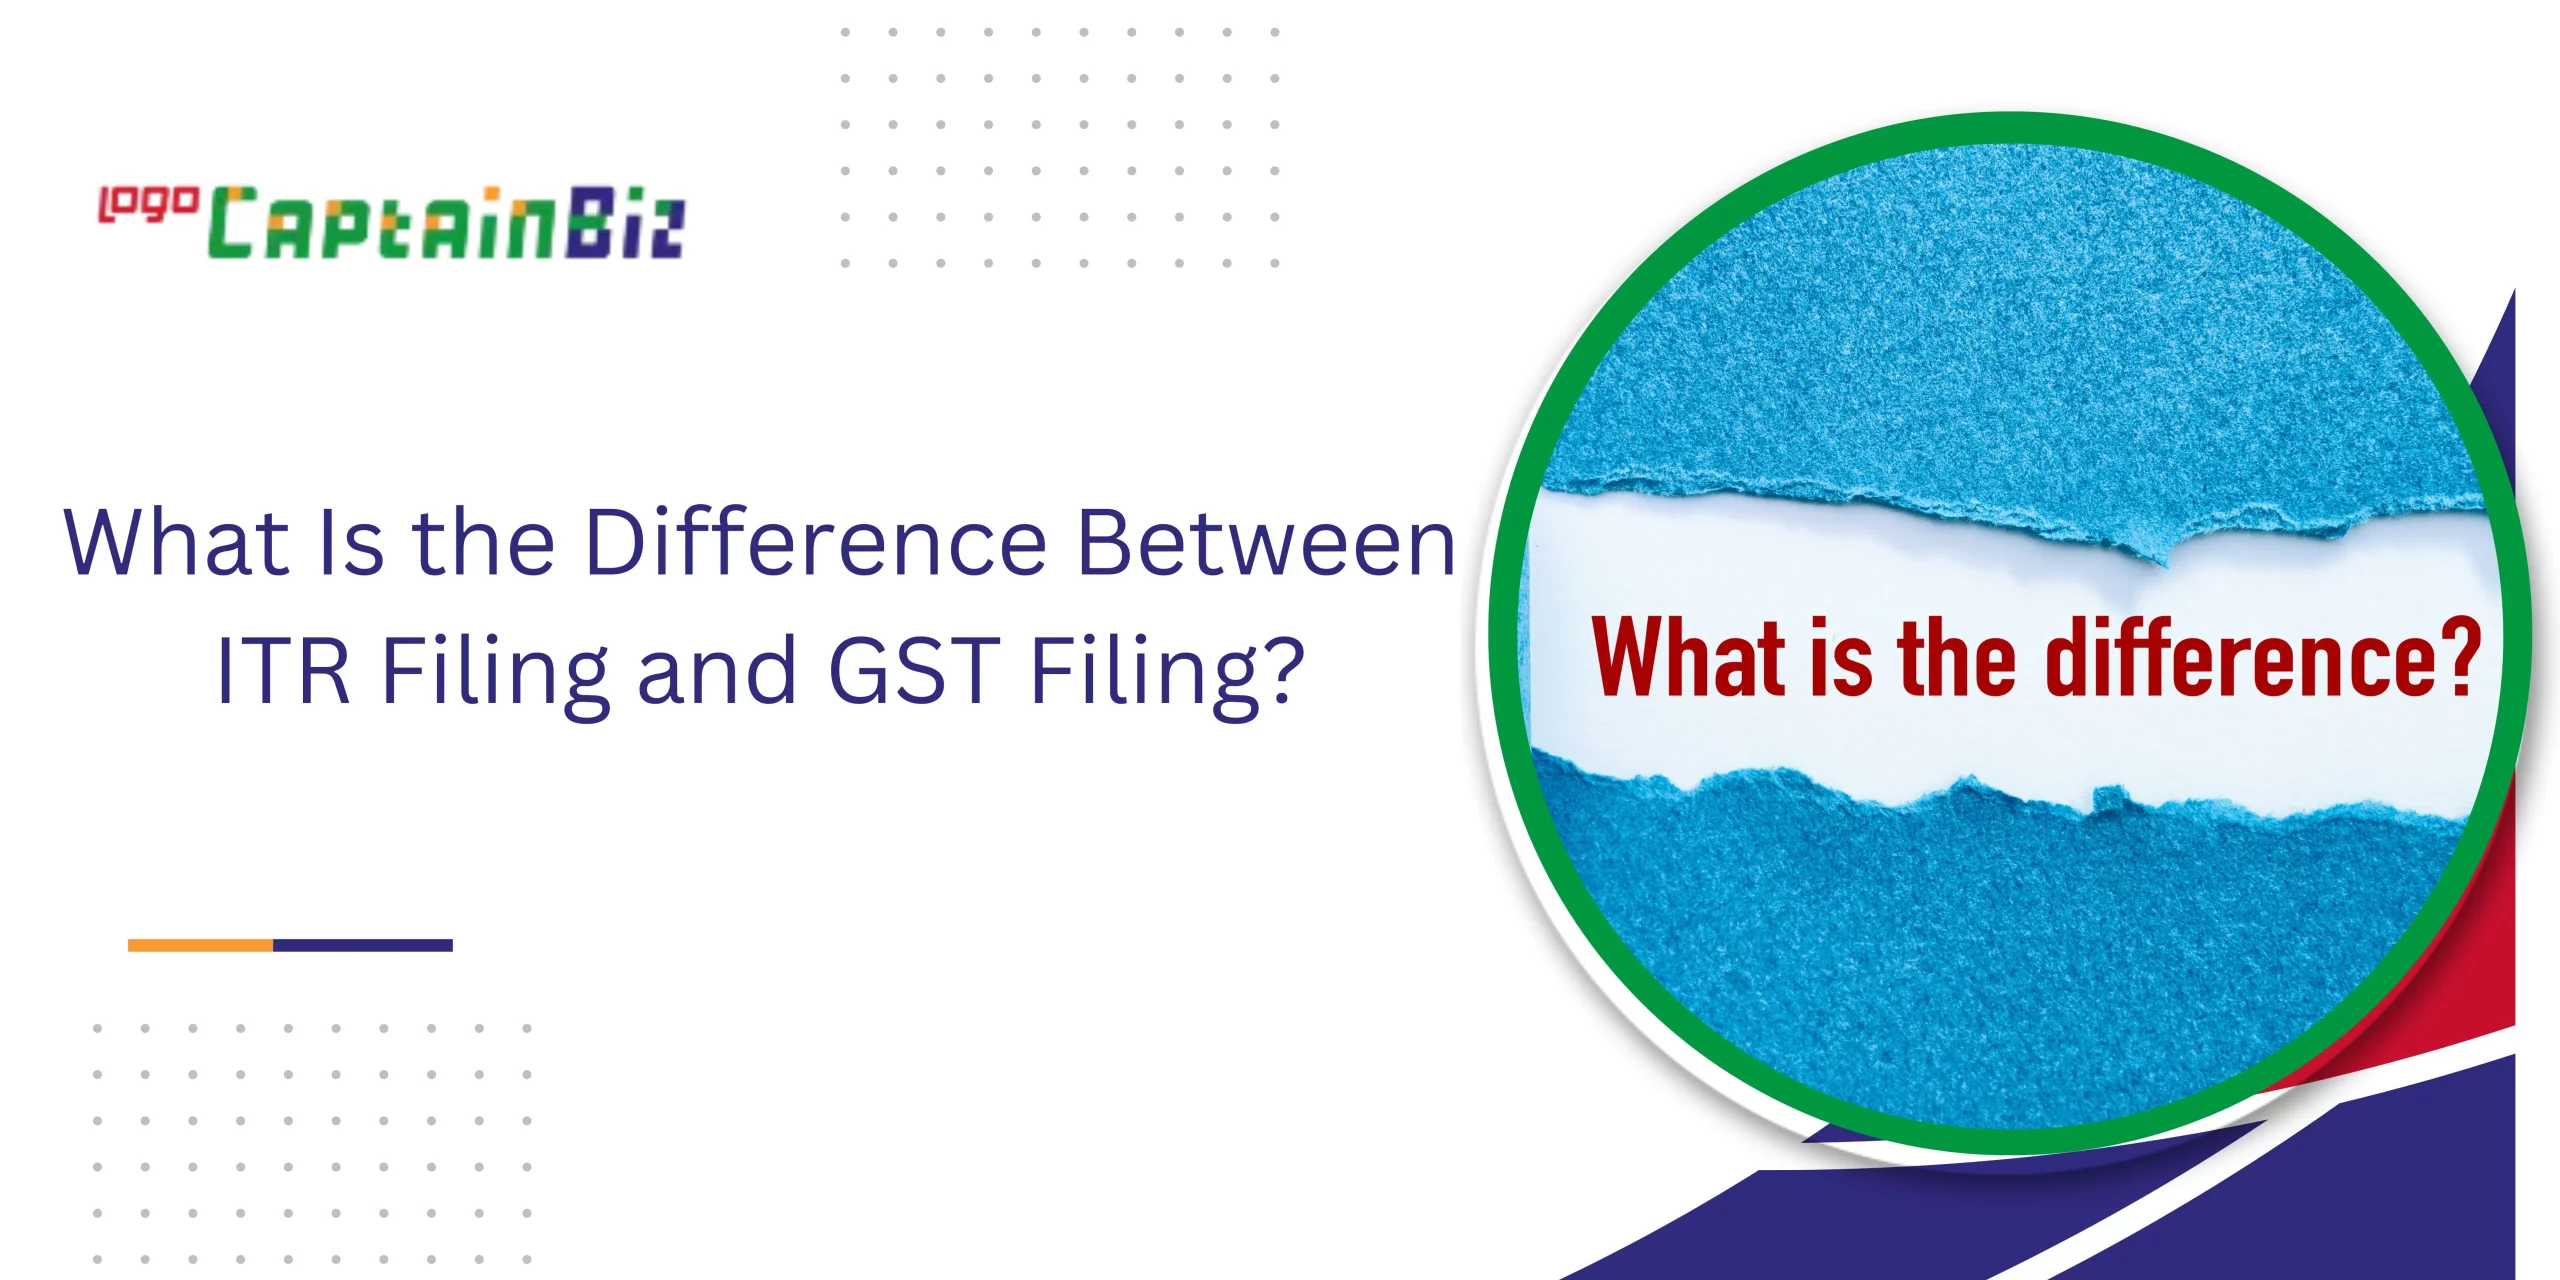 CaptainBiz: What Is the Difference Between ITR Filing and GST Filing